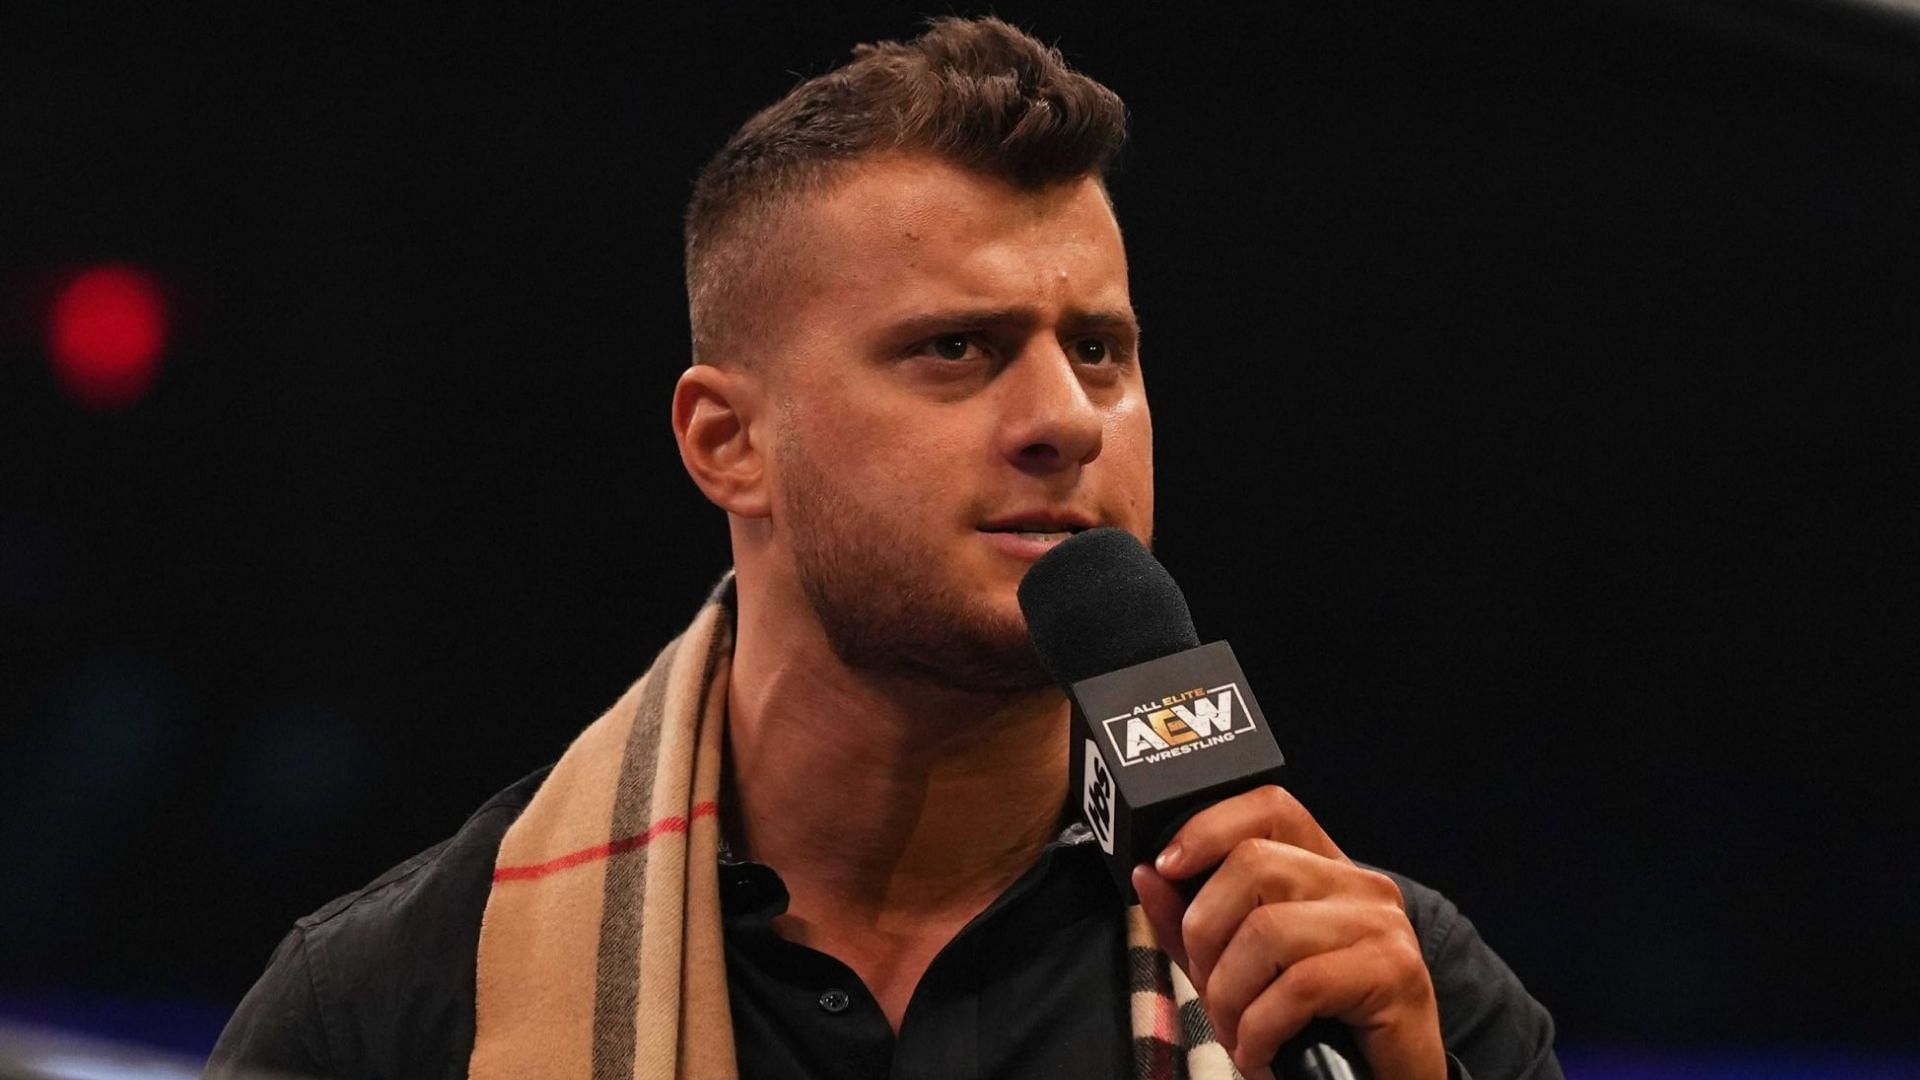 MJF cutting a promo at an AEW event